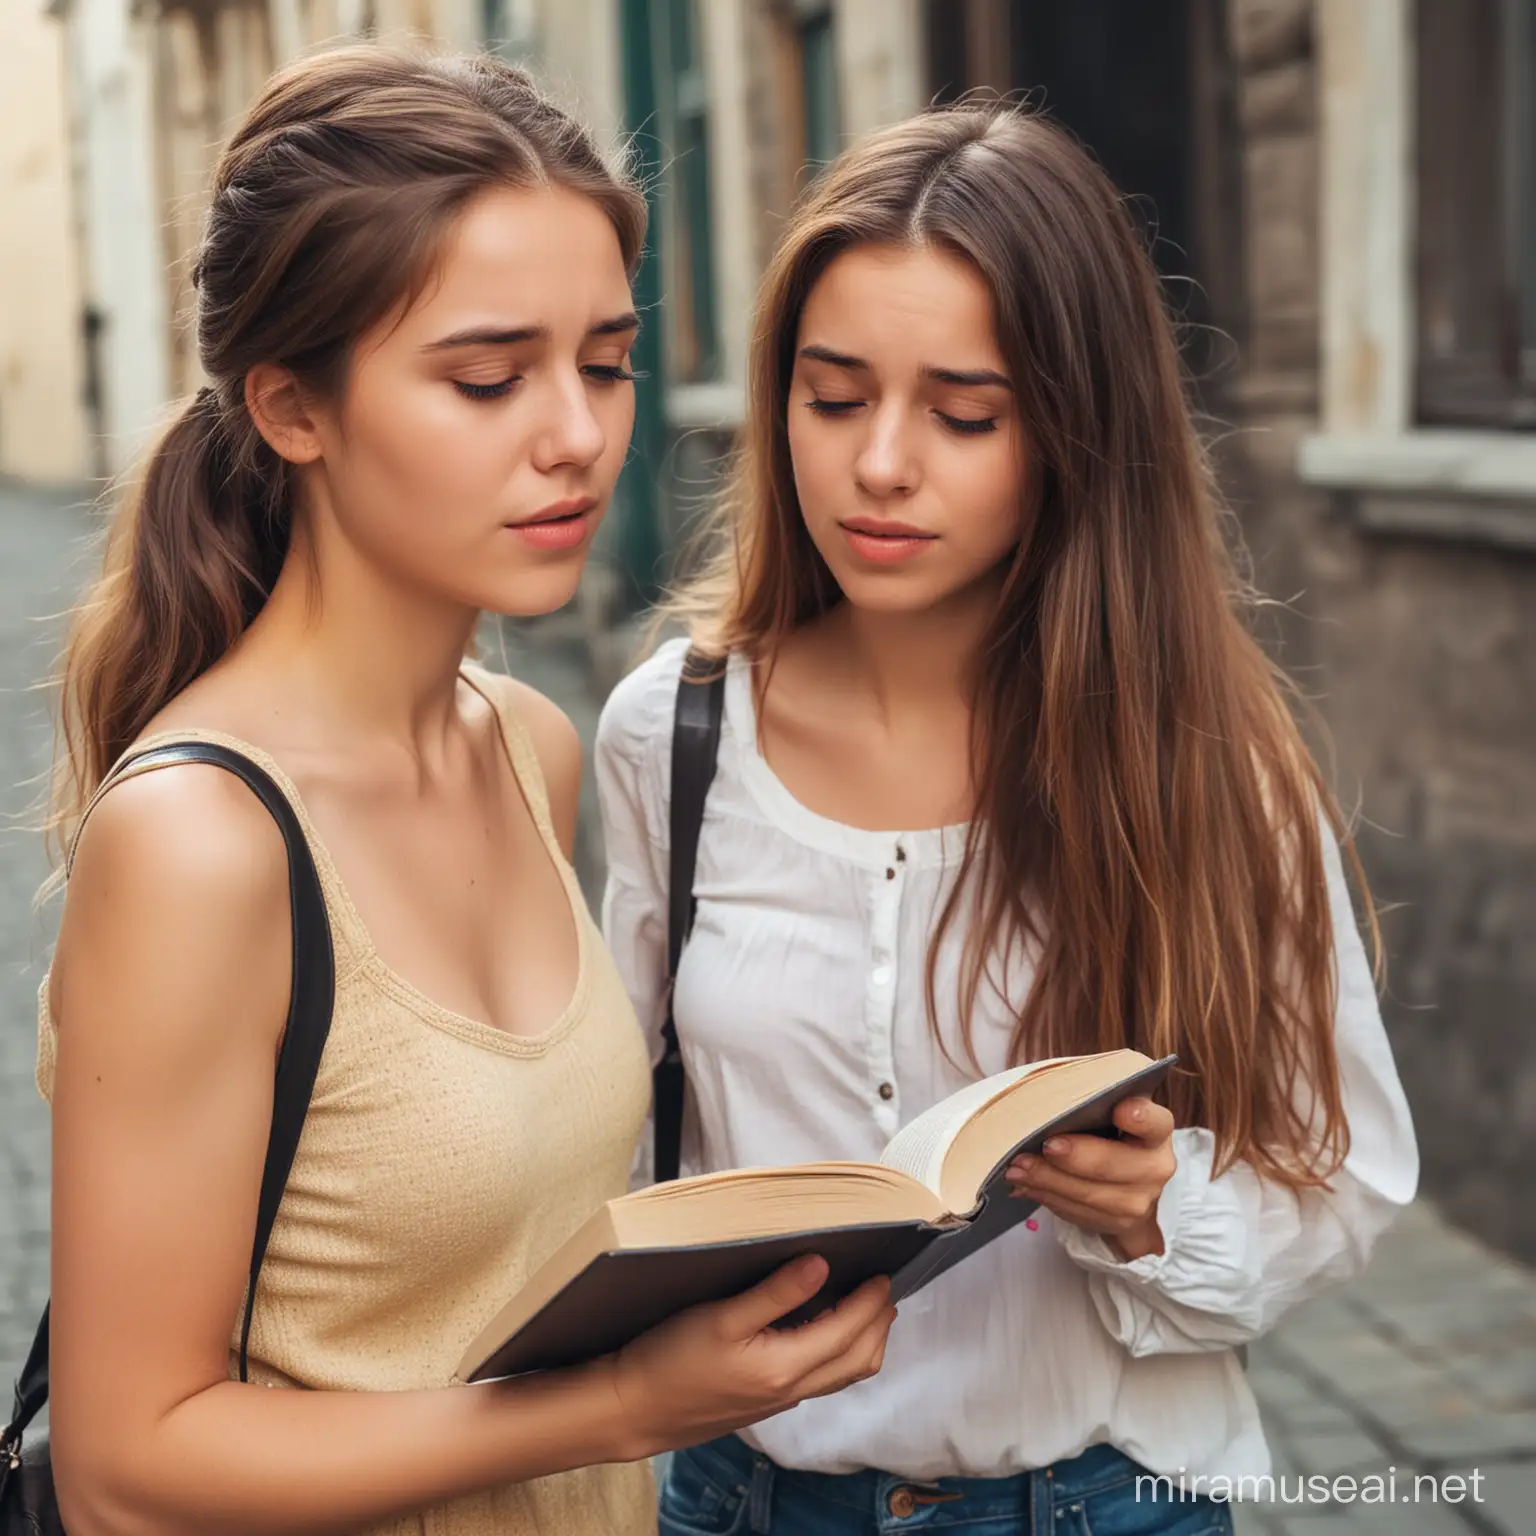 Young Woman Sharing Worries with Friend Holding a Book